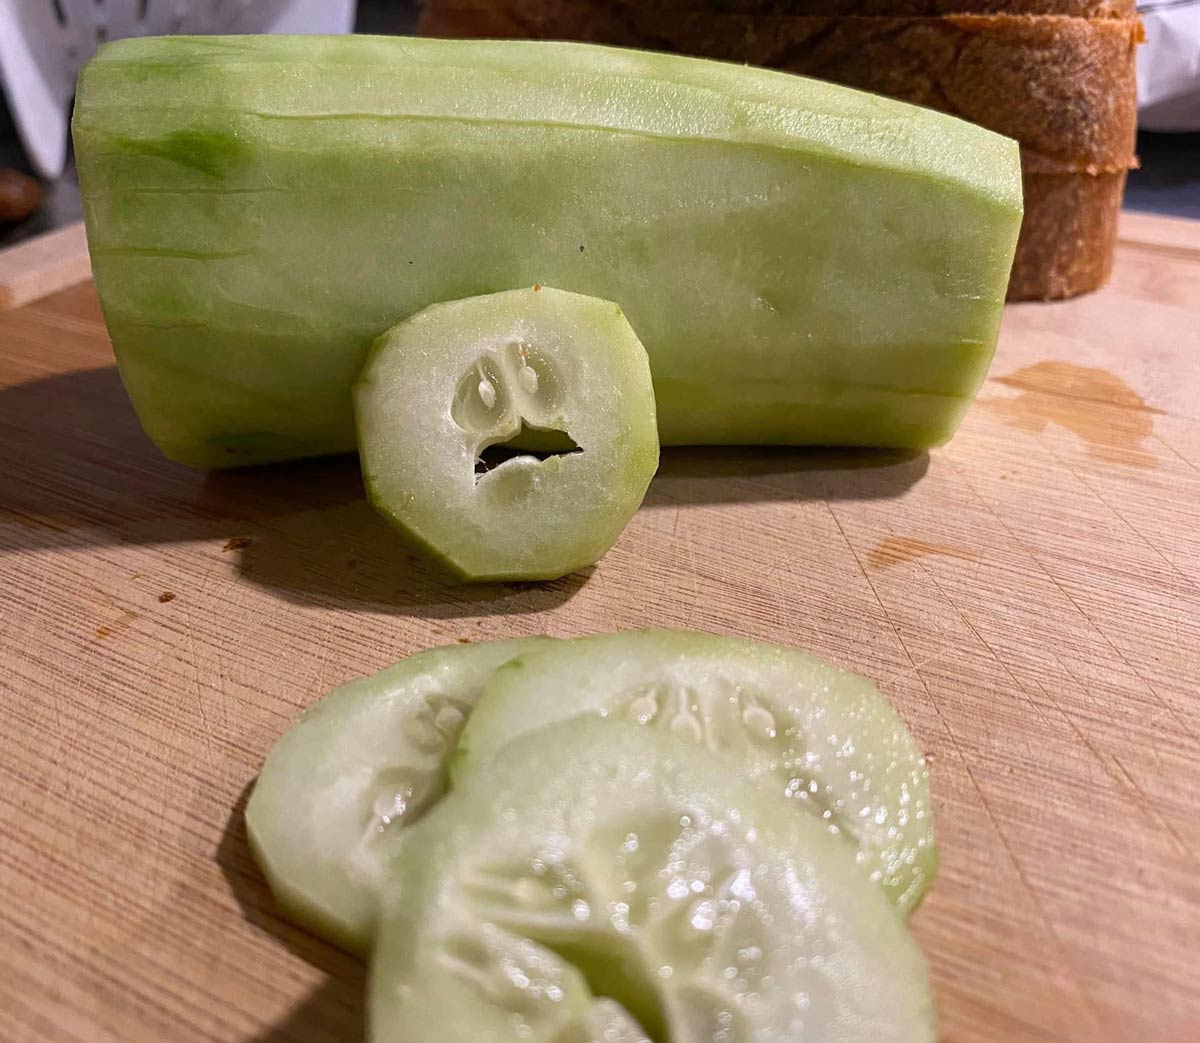 I cut up a cucumber and let me tell you I felt pretty bad about it